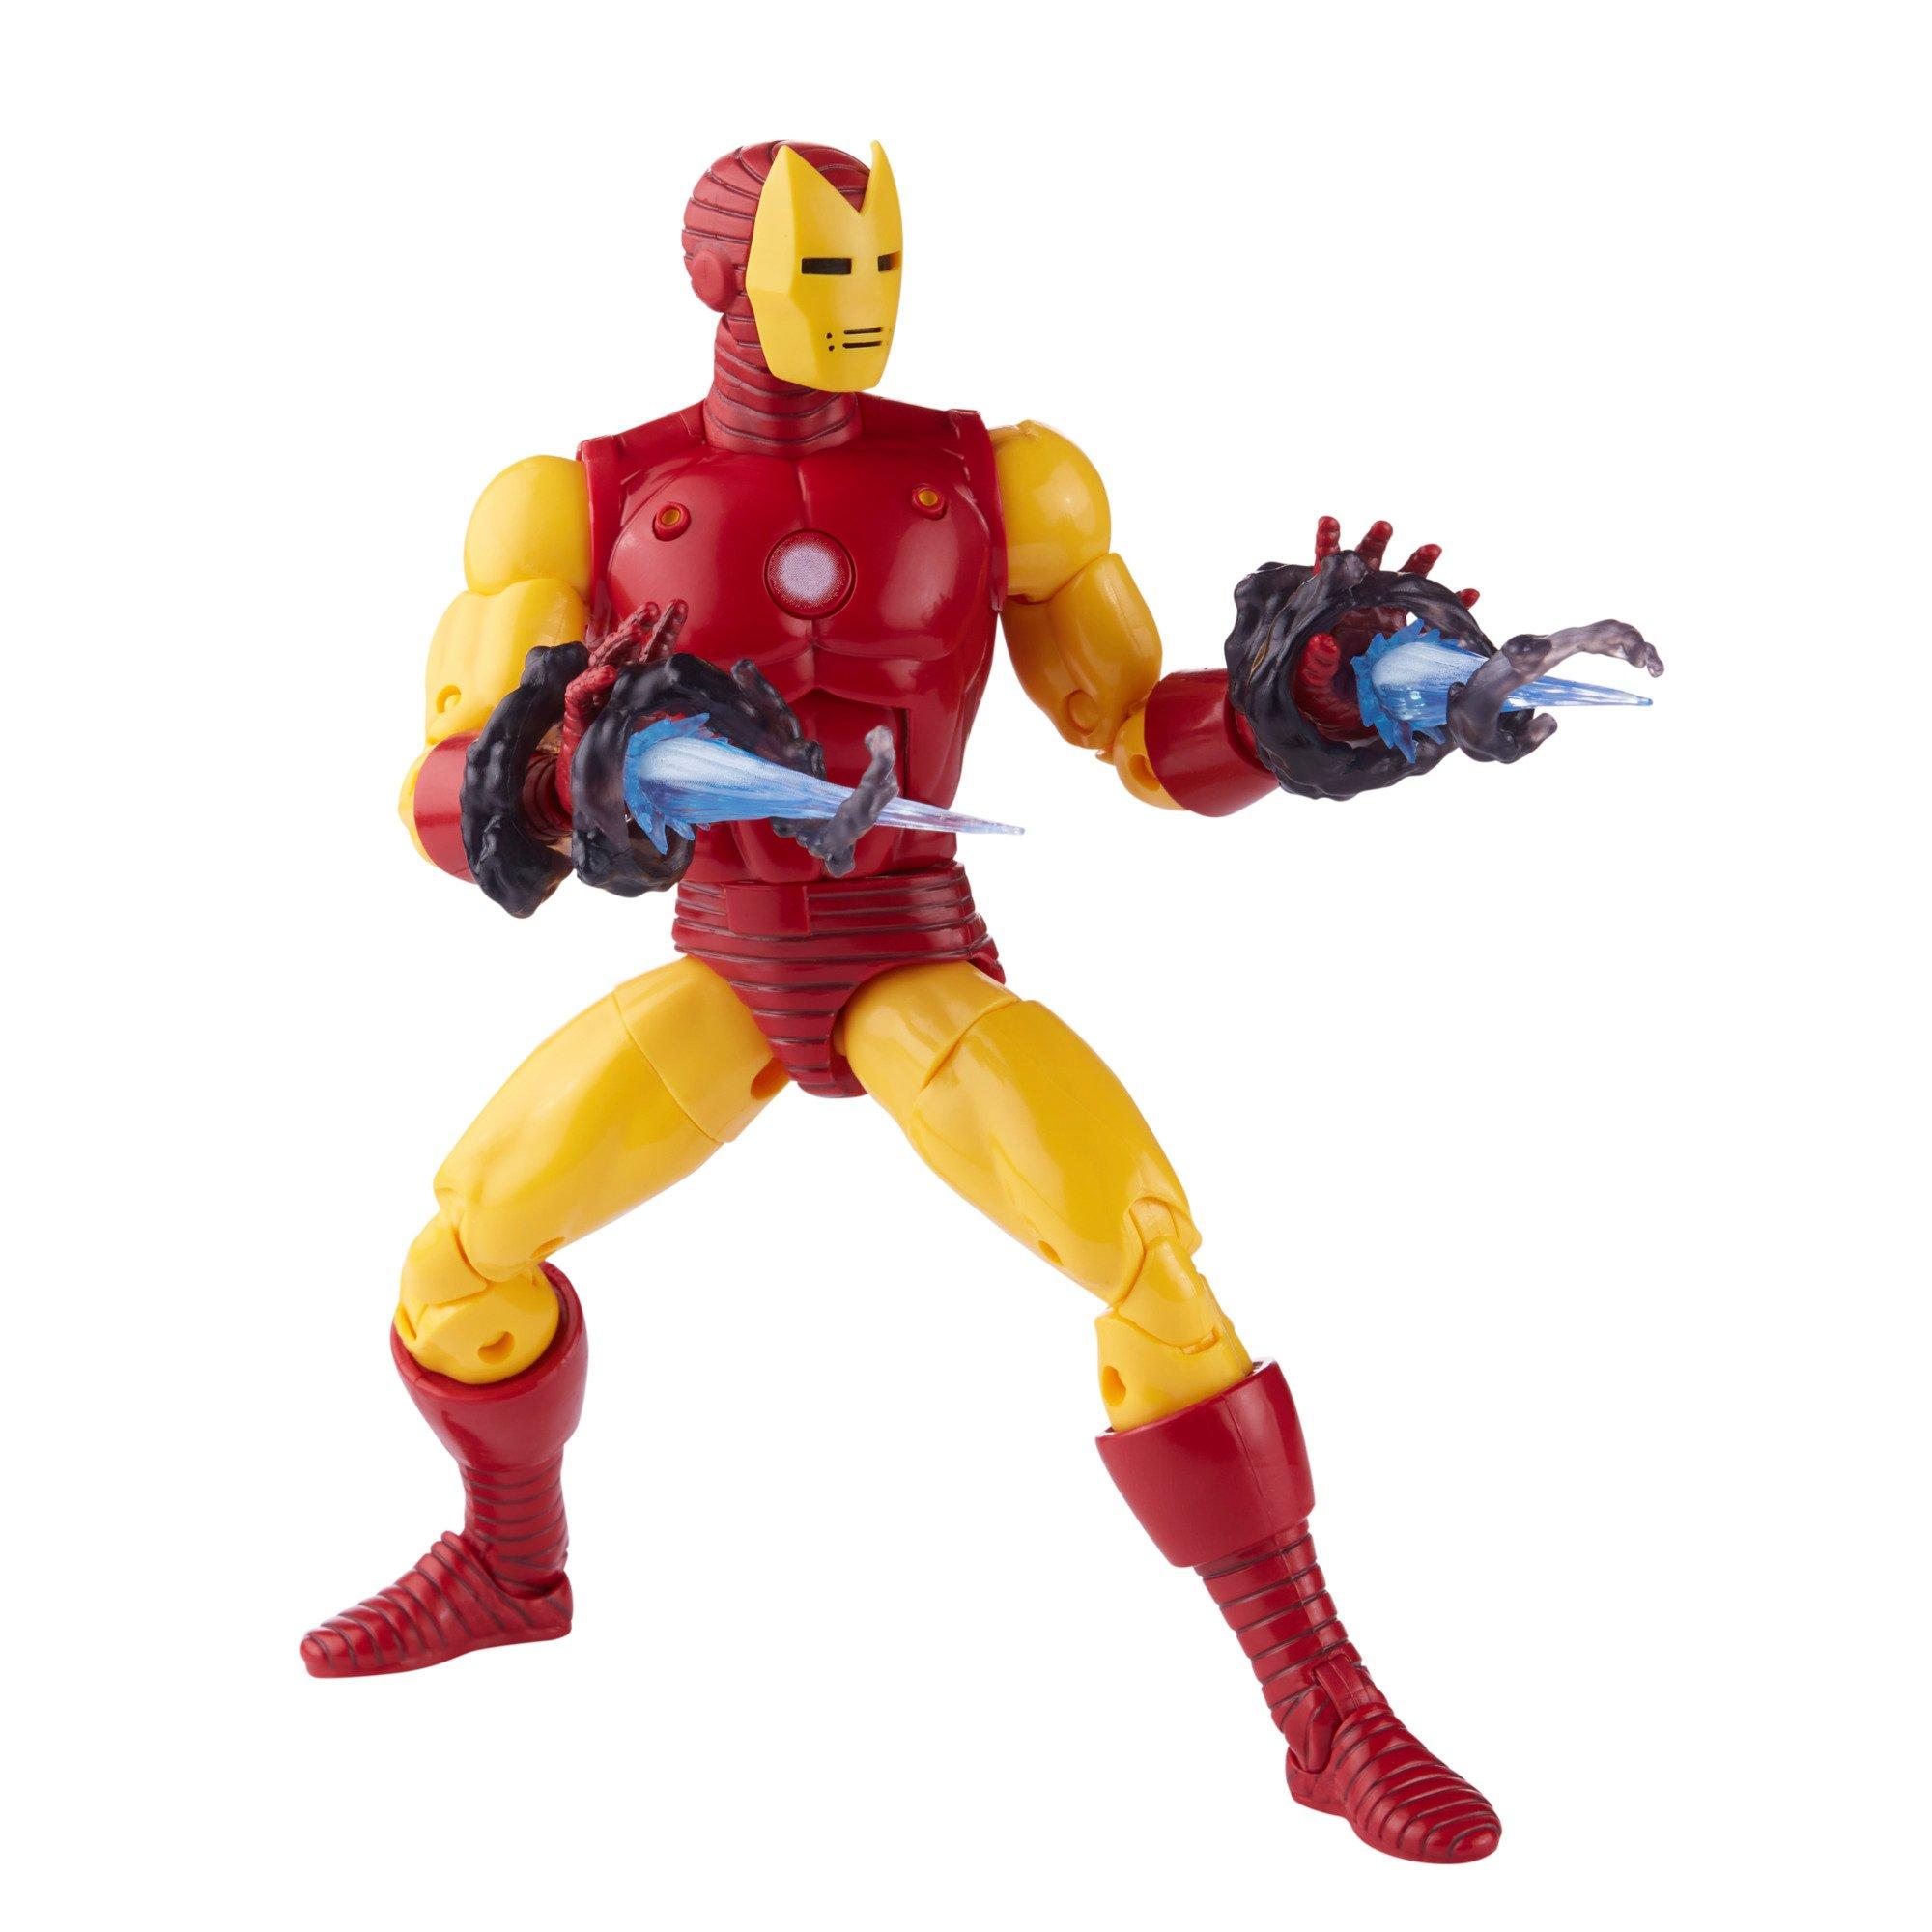 Hasbro Avengers Marvel Legends Series 6 Inches Iron Man Action Figure for sale online